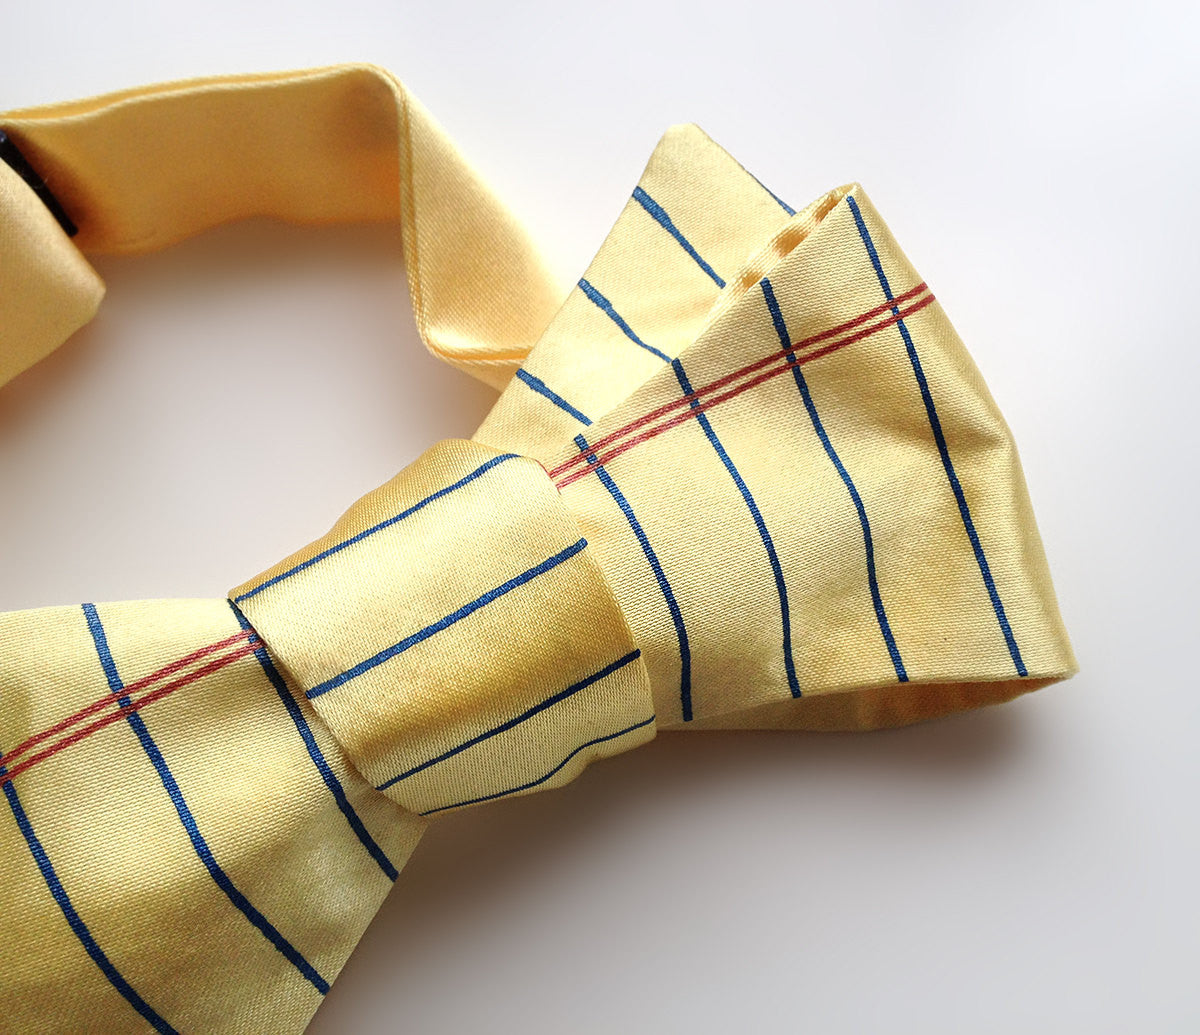 College Ruled Lined Paper Bow Tie